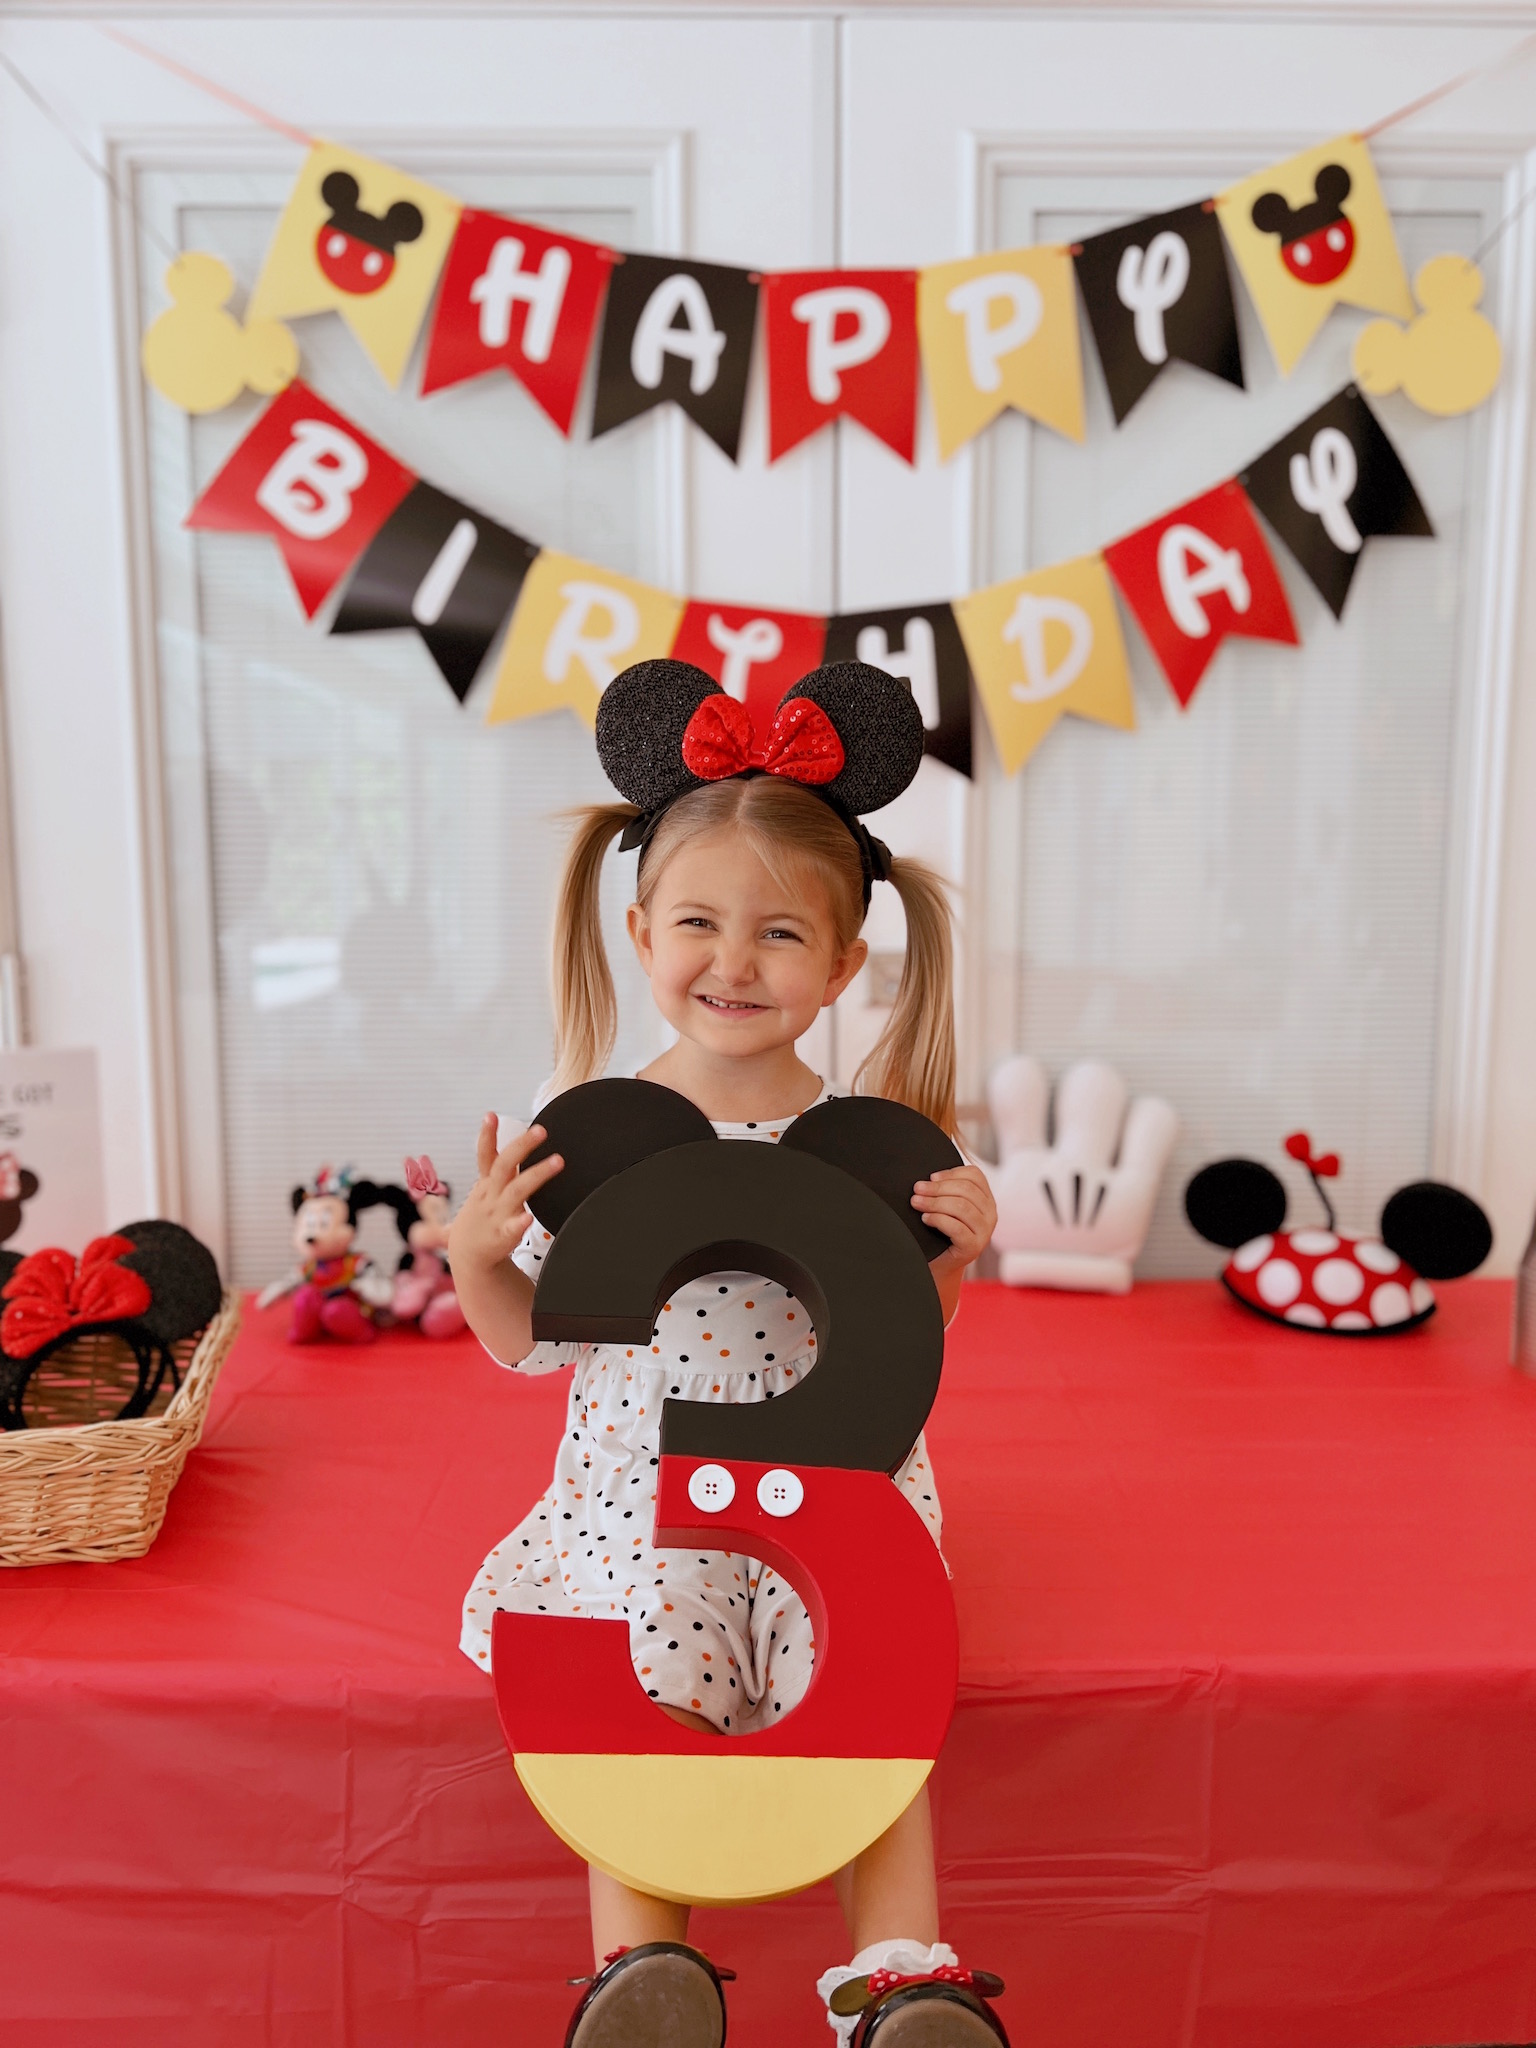 Mickey and Minnie Mouse Play Birthday Party Games 🎈